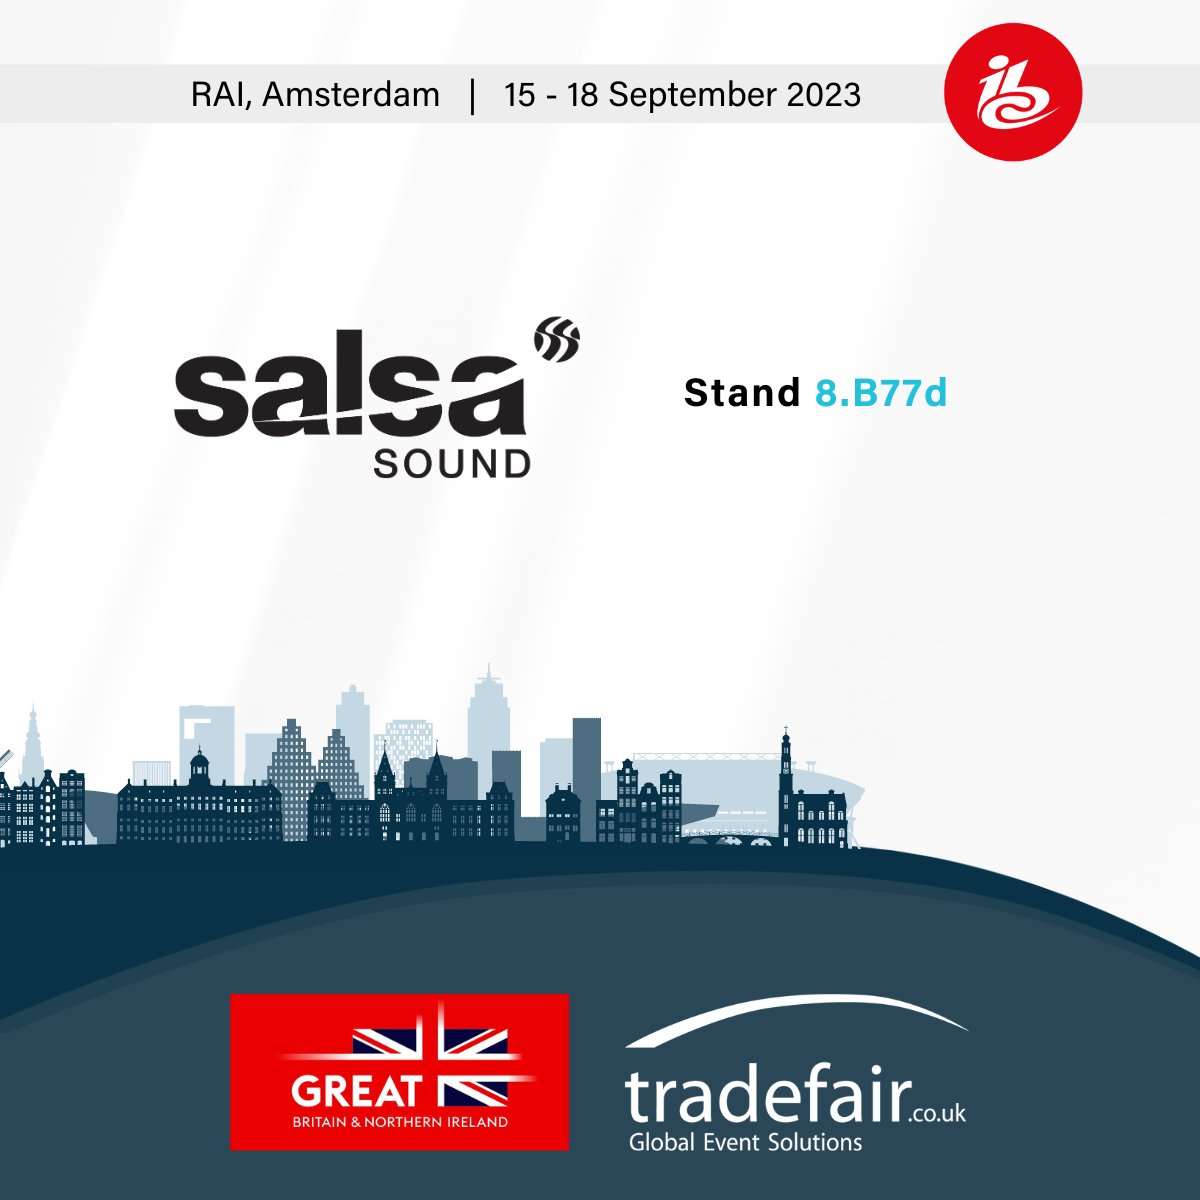 @salsa_sound is releasing #MIXaiR 3.0 at this year’s @IBCShow in the #UKPavilion – its biggest update yet! Jam-packed with new features. Find the team on stand 8.B77d and explore more on the new release and its features - bit.ly/3vBGEGW #UKatIBC2023 #IBC2023 #IBC